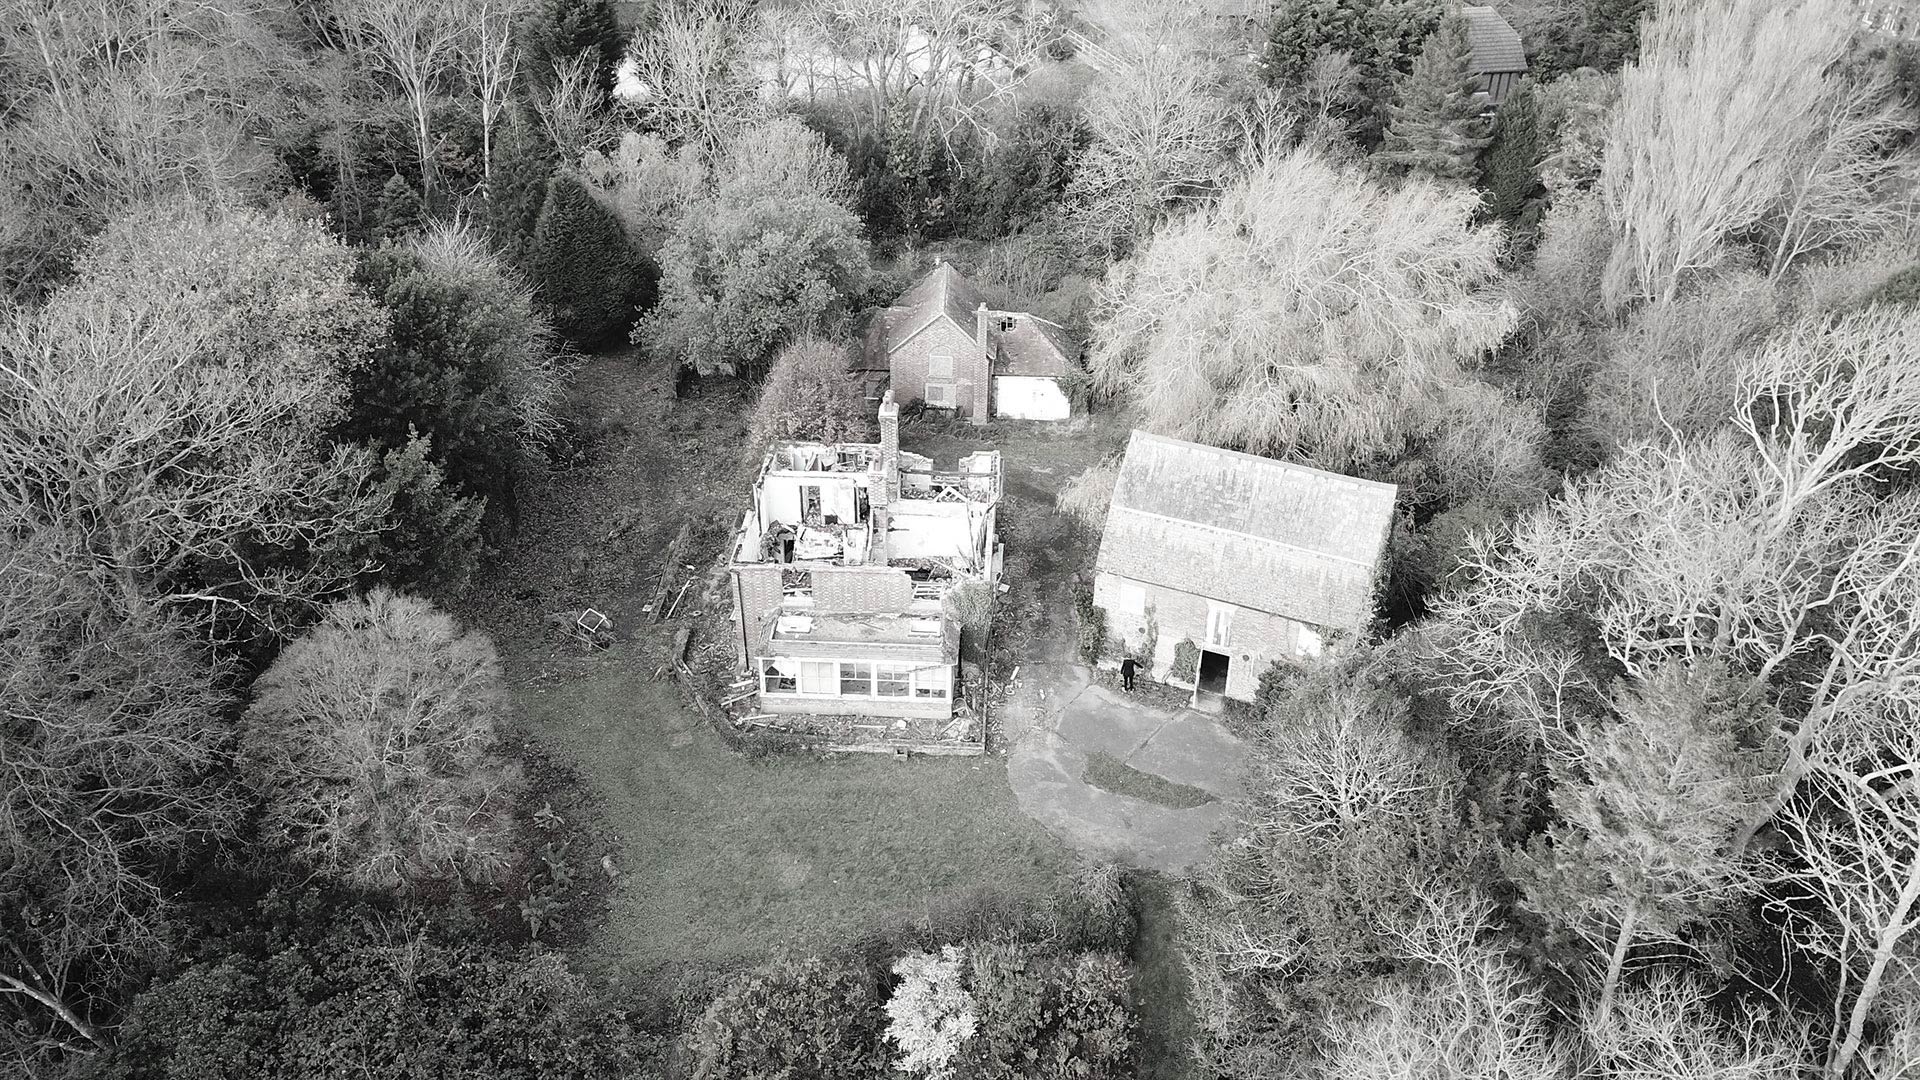 aerial view of existing house with roof collapsed, surrounded by trees